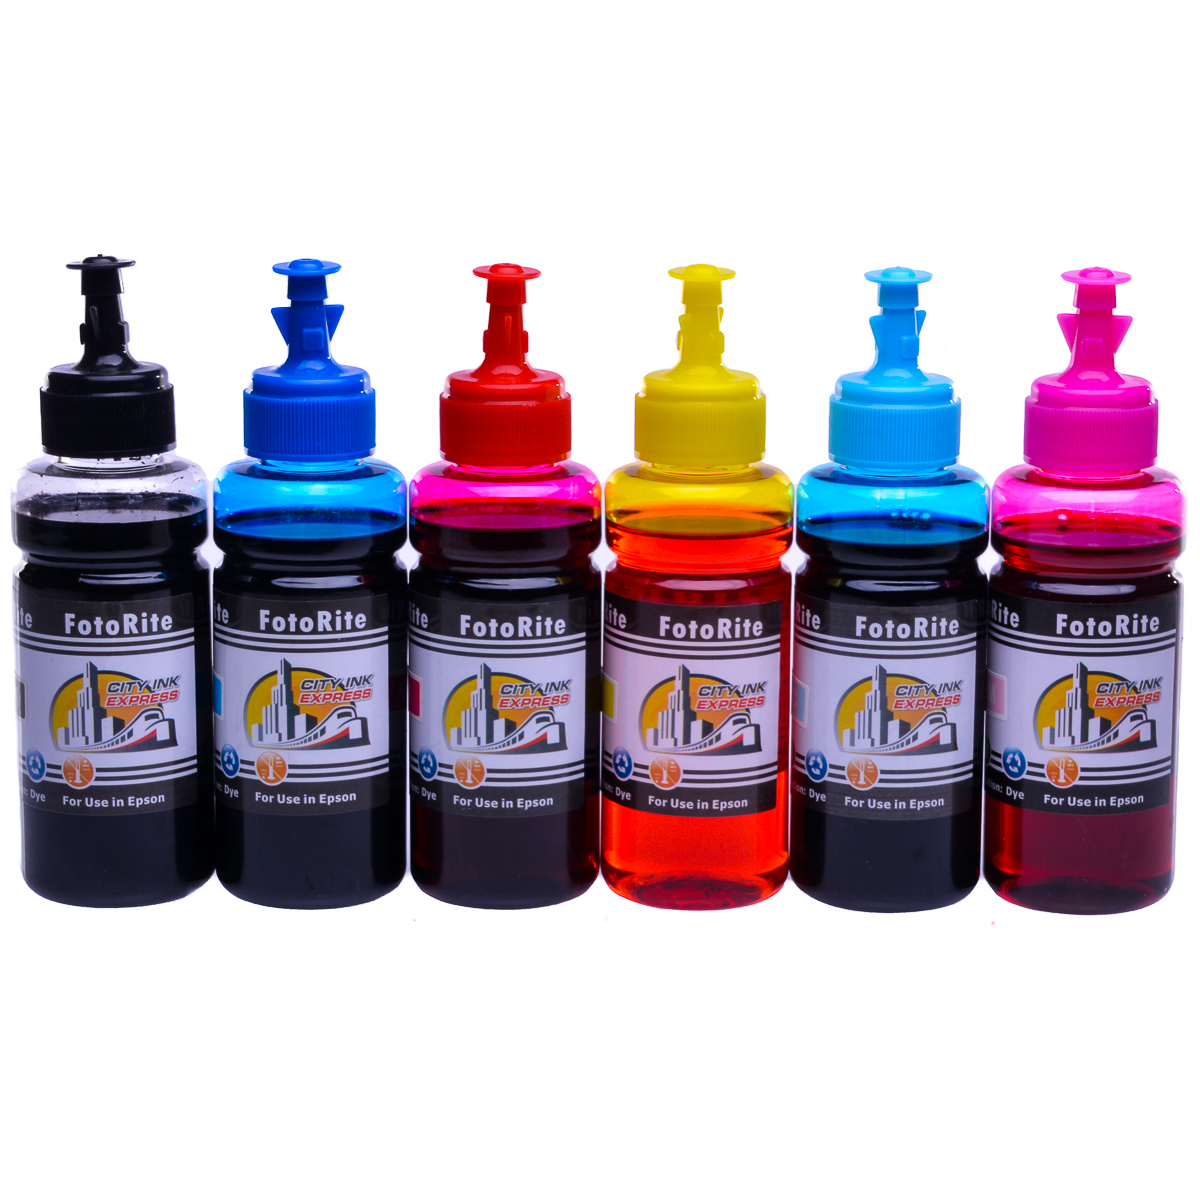 Cheap Multipack dye ink refill replaces Epson Stylus Photo 1400